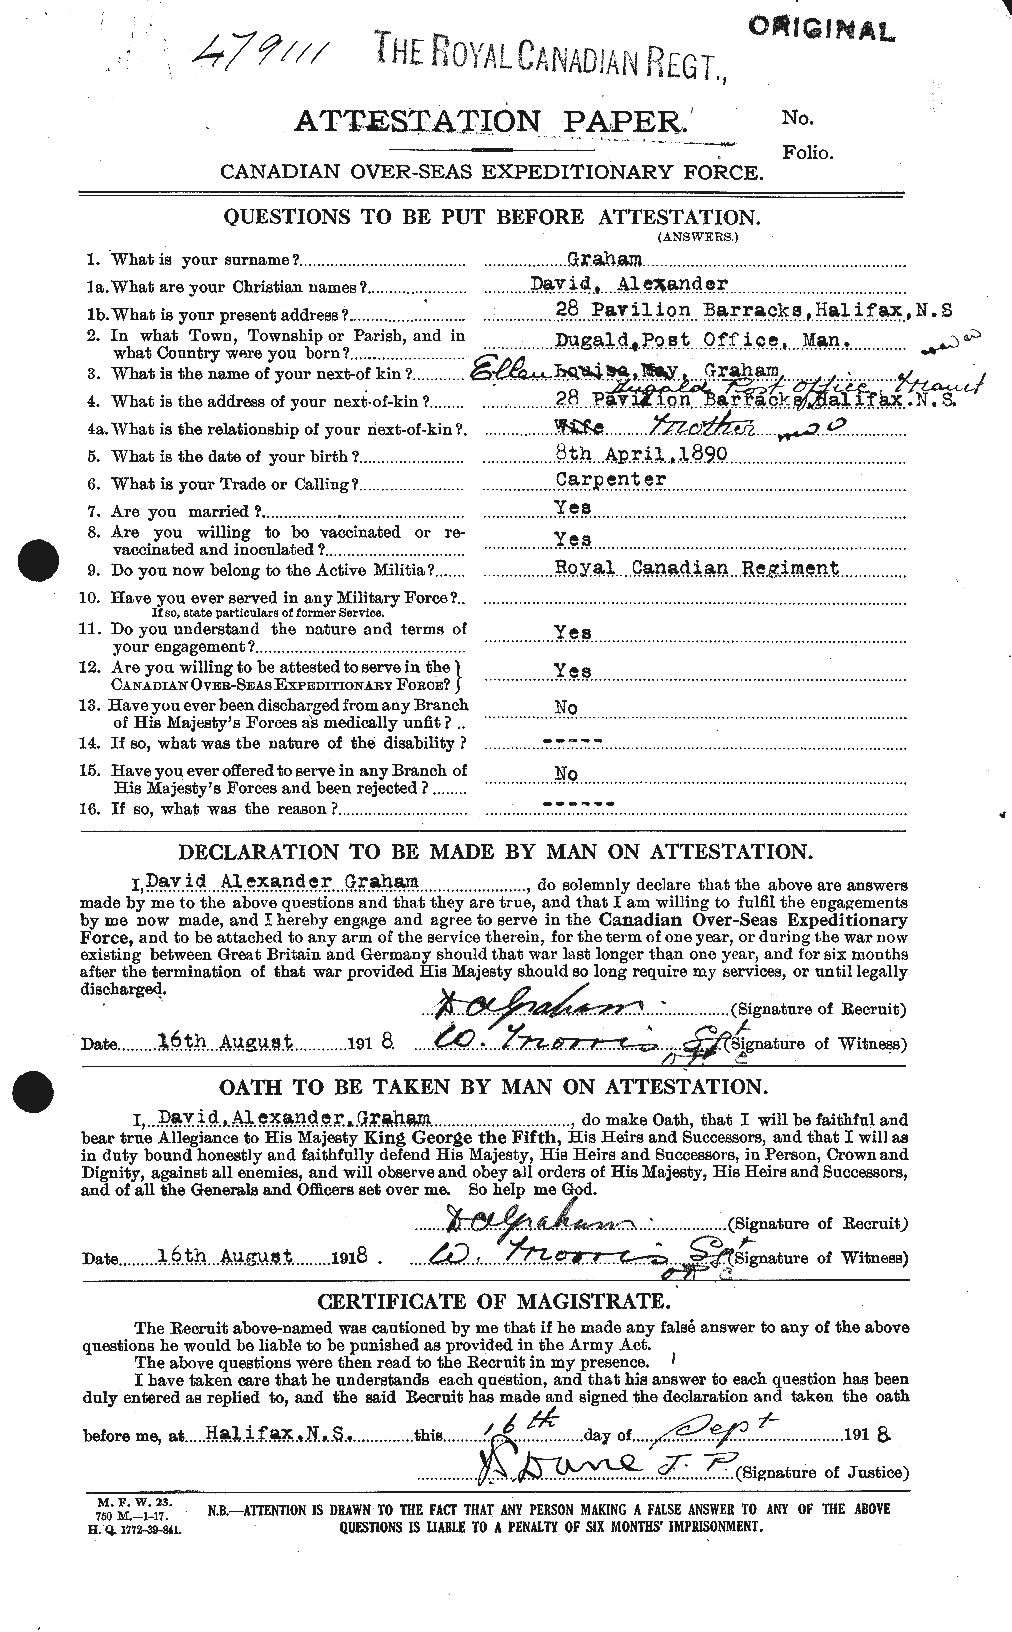 Personnel Records of the First World War - CEF 353824a